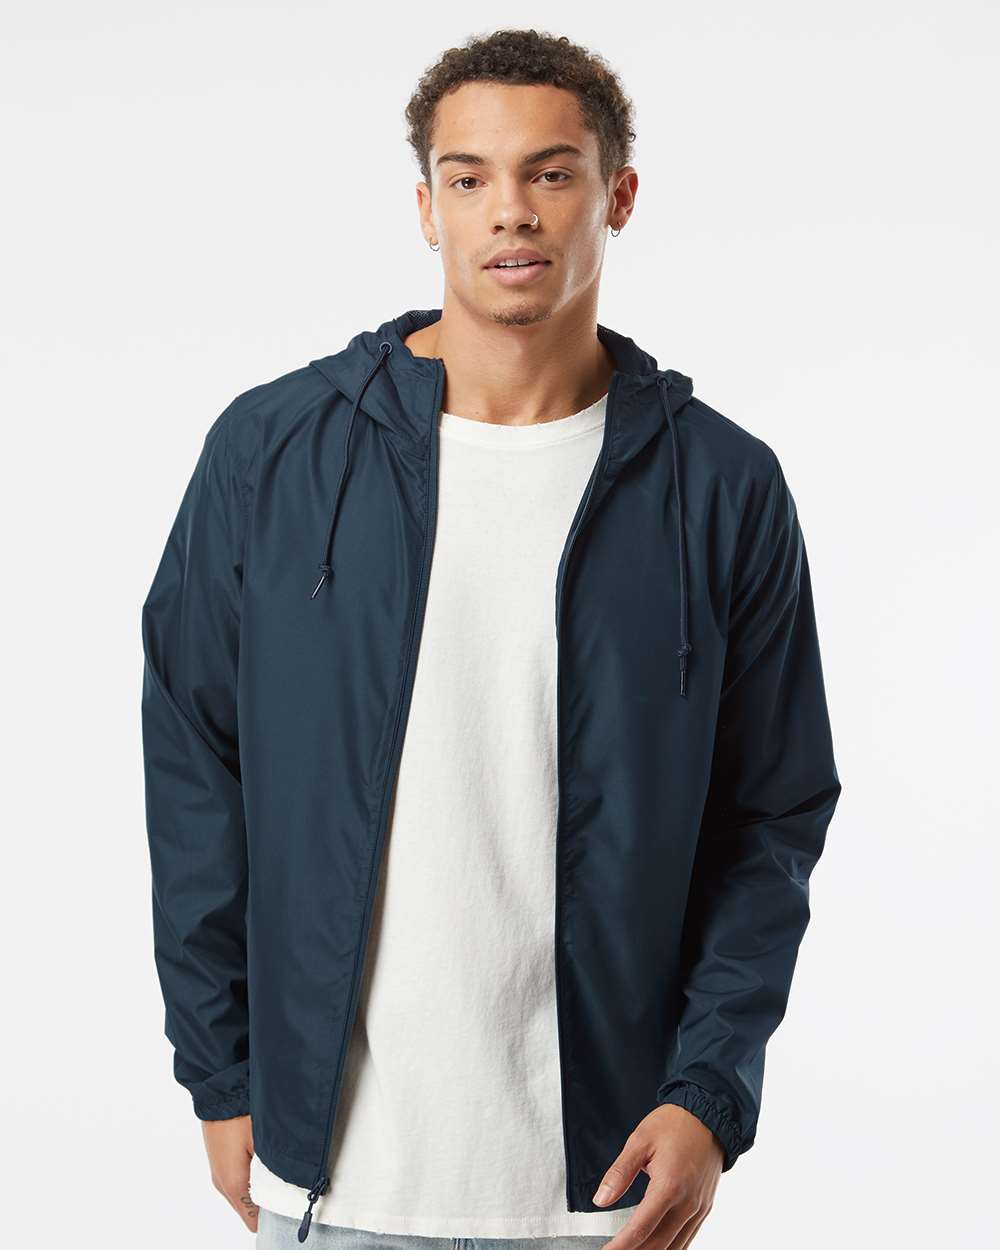 Independent Trading Co. Unisex Lightweight Windbreaker Full-Zip Jacket EXP54LWZ #colormdl_Classic Navy